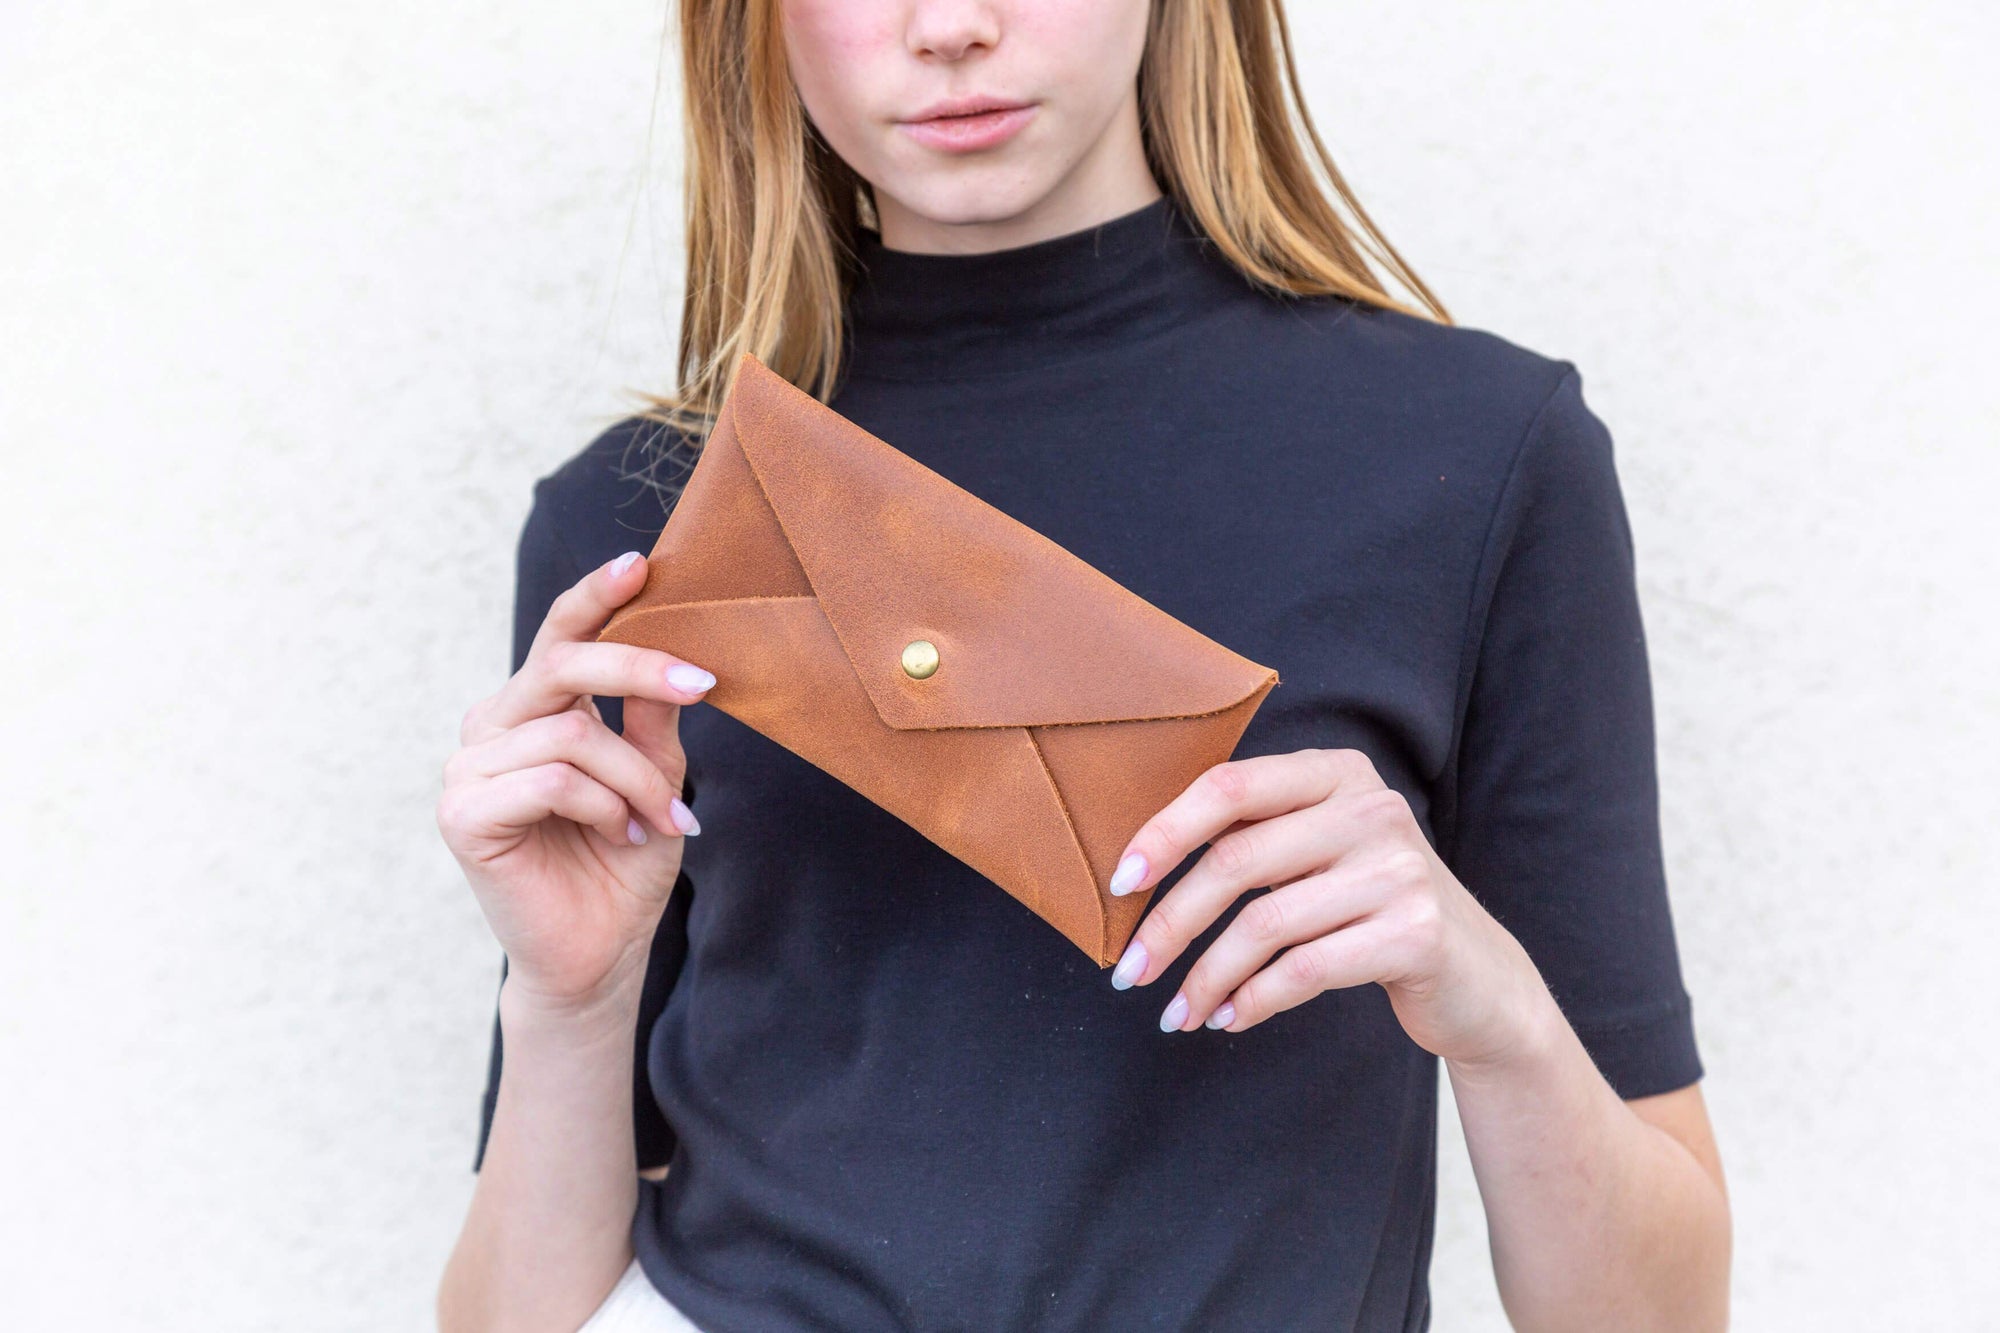 Leather Pouch, Small Purse Clutch Evening and Day Bag, Handmade Minimalis Leather Gift for Women and Men, Cell Phone Bag , personalized leather gift, leather envelope pouch, women leather pouch, small gift, gift under $50, leather clutch, gift for her, leather pouch, small case, phone pouch, envelope purse, mayko bags, Minimalist Wallets||Brown||